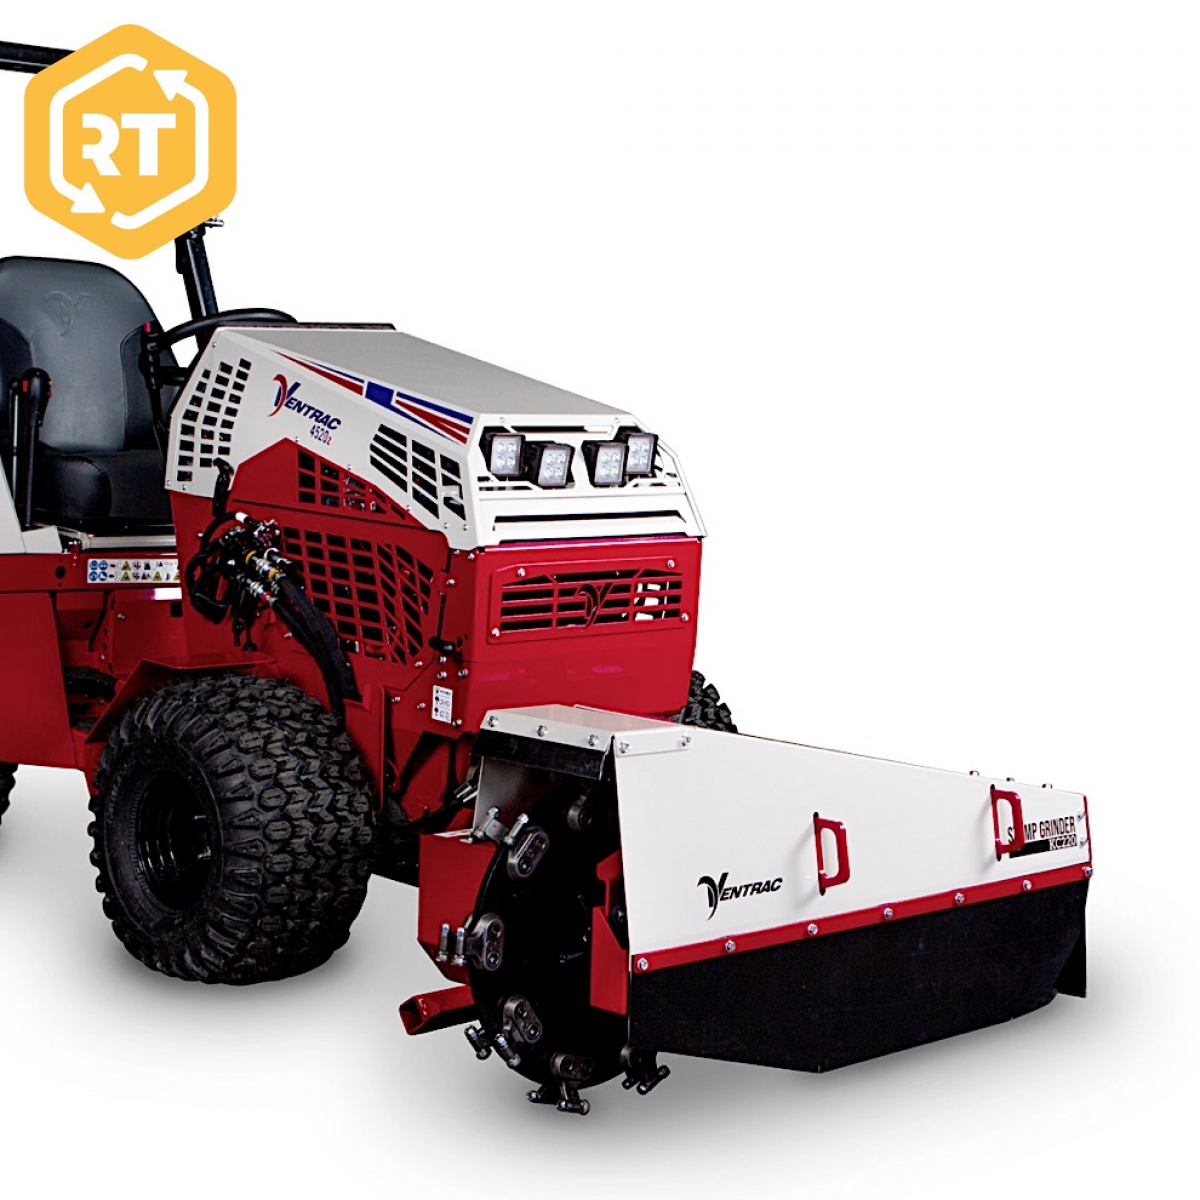 Ventrac 4520Y with KC220 Stump Grinder | Available for Hire!